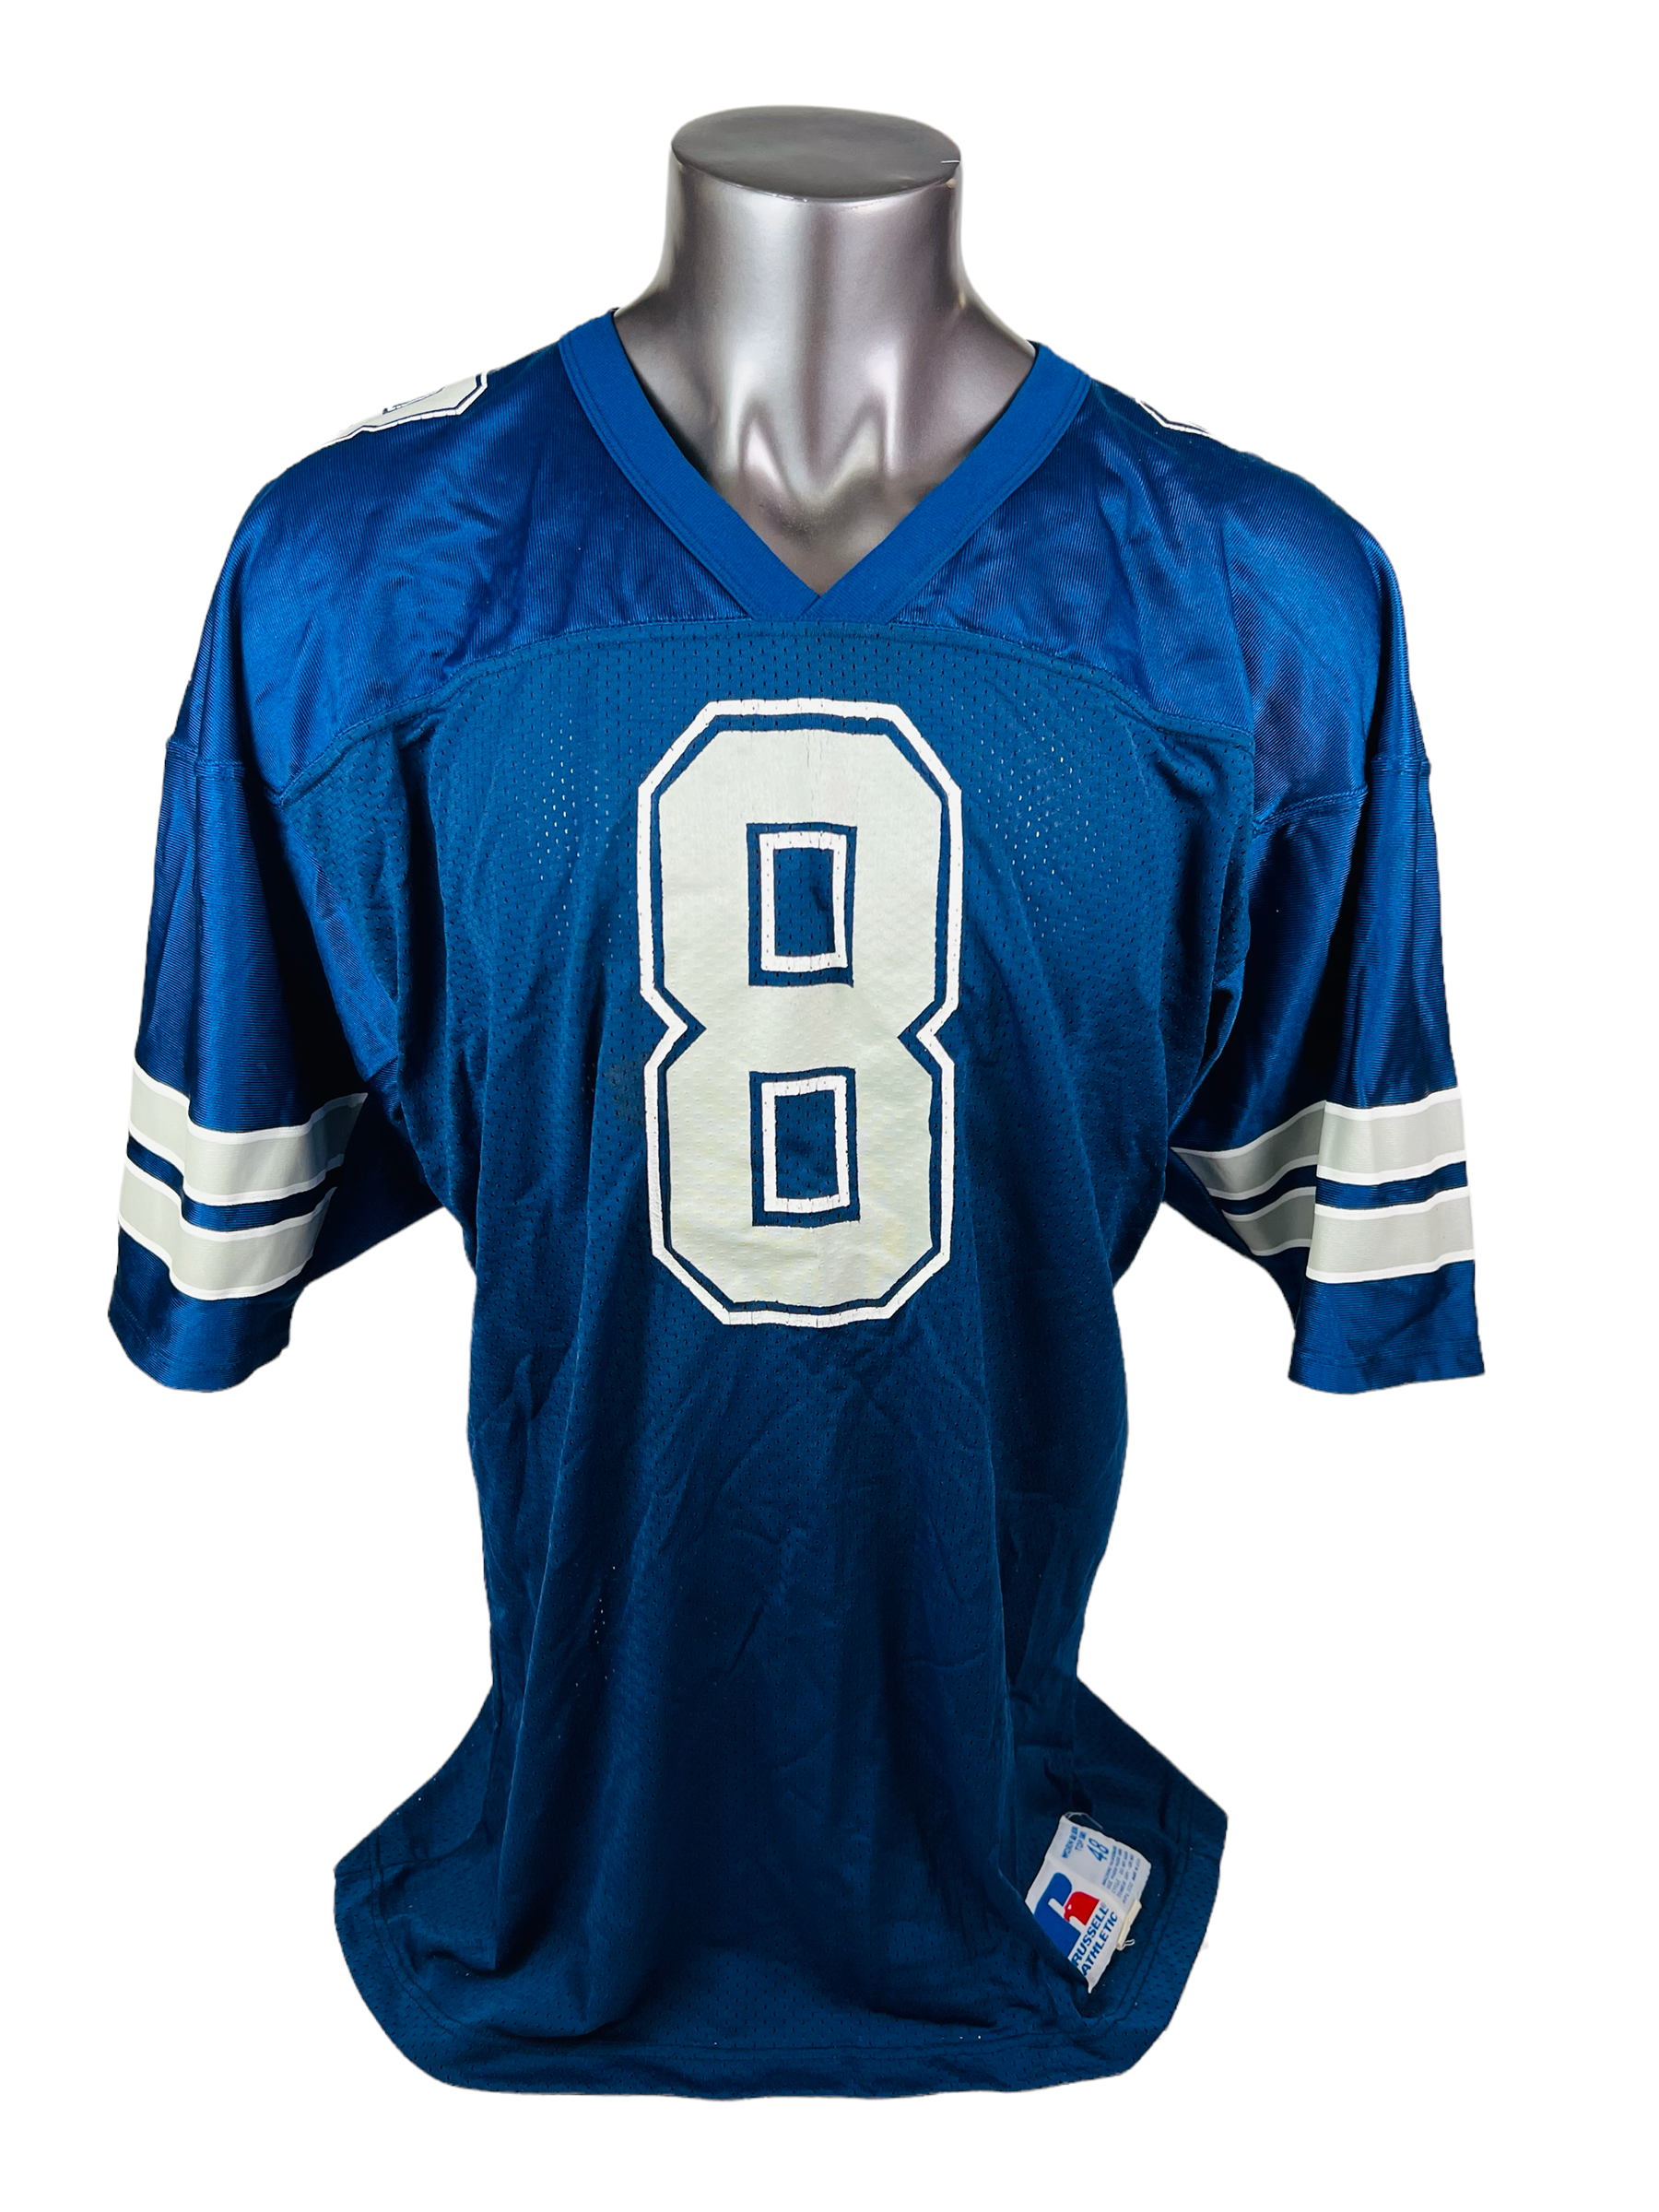 TROY AIKMAN DALLAS COWBOYS VINTAGE 1990'S RUSSELL ATHLETIC JERSEY ADUL -  Bucks County Baseball Co.